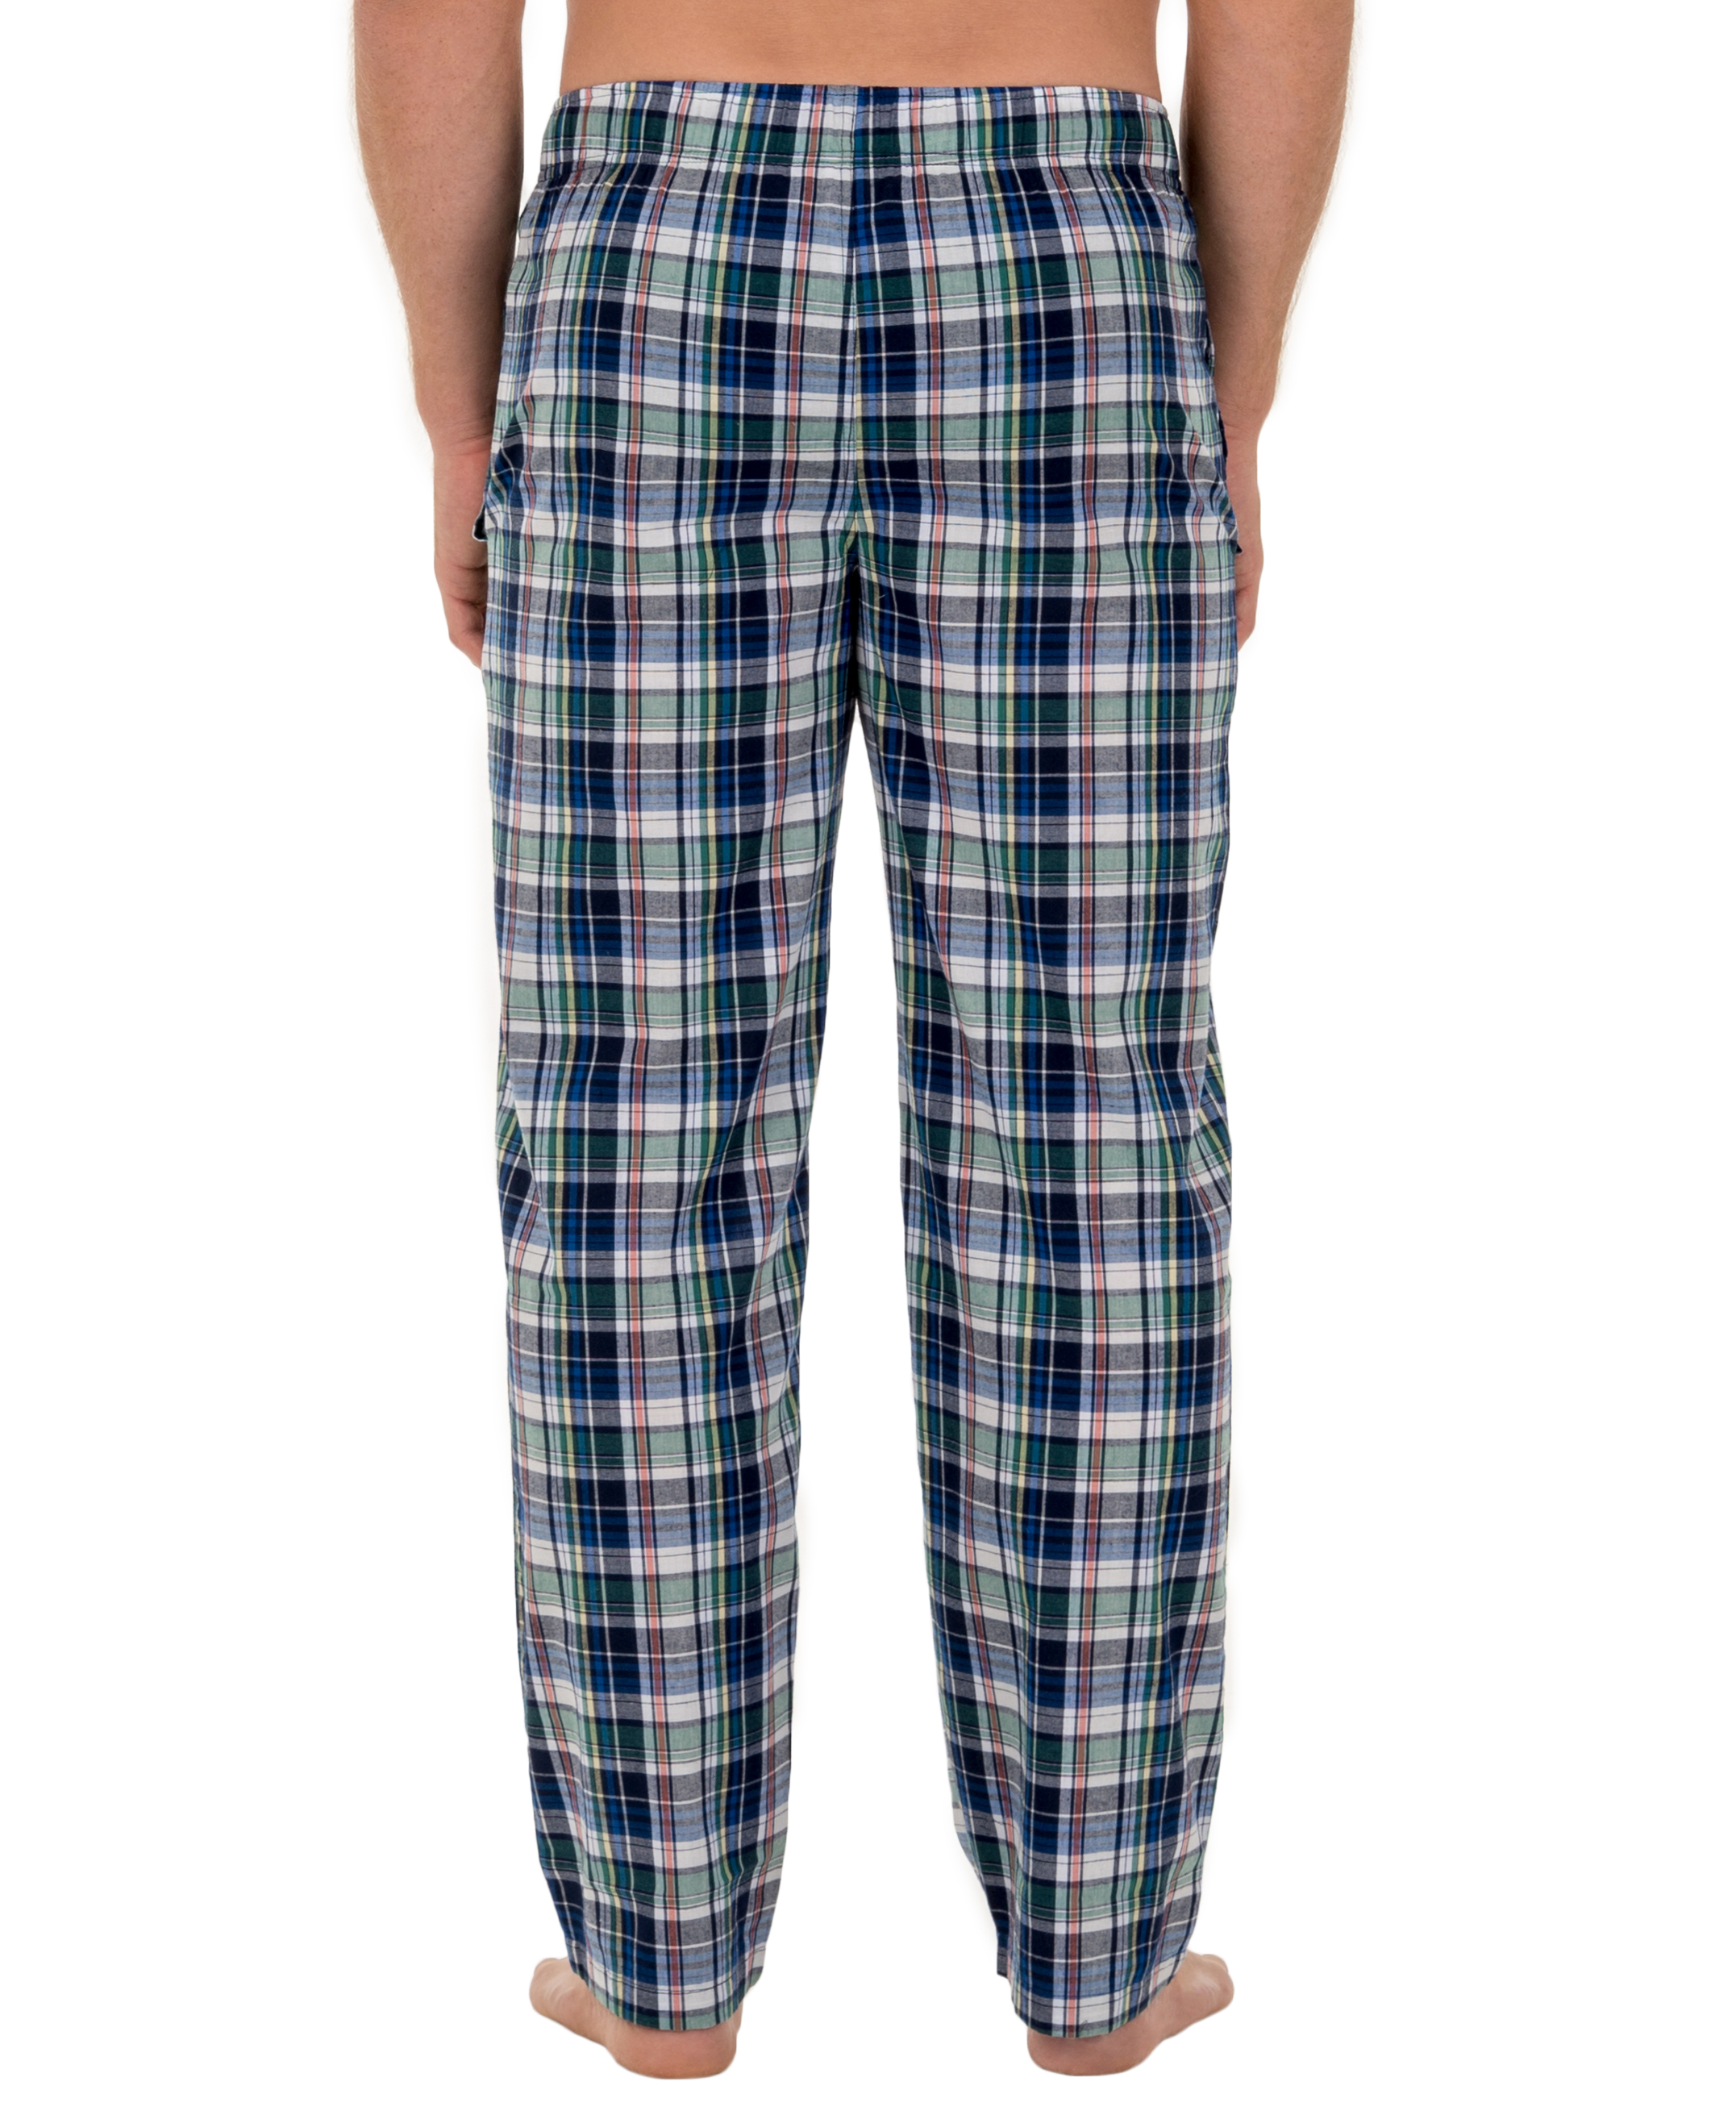 Fruit of the Loom Men's and Big Men's Microsanded Woven Plaid Pajama Pants, Sizes S-6XL & LT-3XLT - image 2 of 5